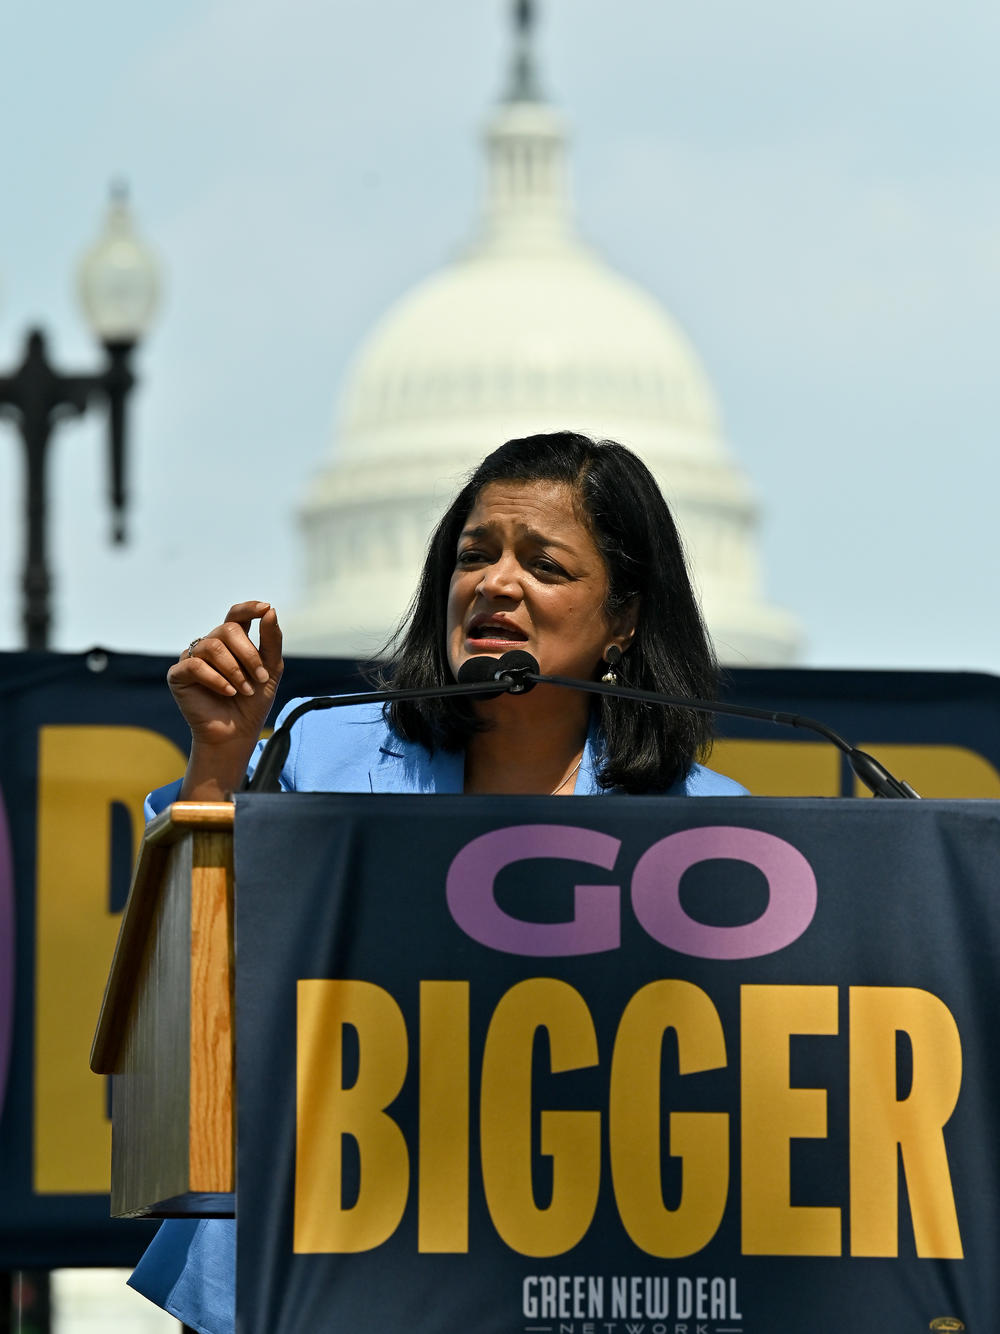 Rep. Pramila Jayapal, D-Wash., is chair of the Congressional Progressive Caucus. She has backed anti-trust legislation opposed by some centrists in her party, as well as sweeping climate actions in the framework of the Green New Deal.